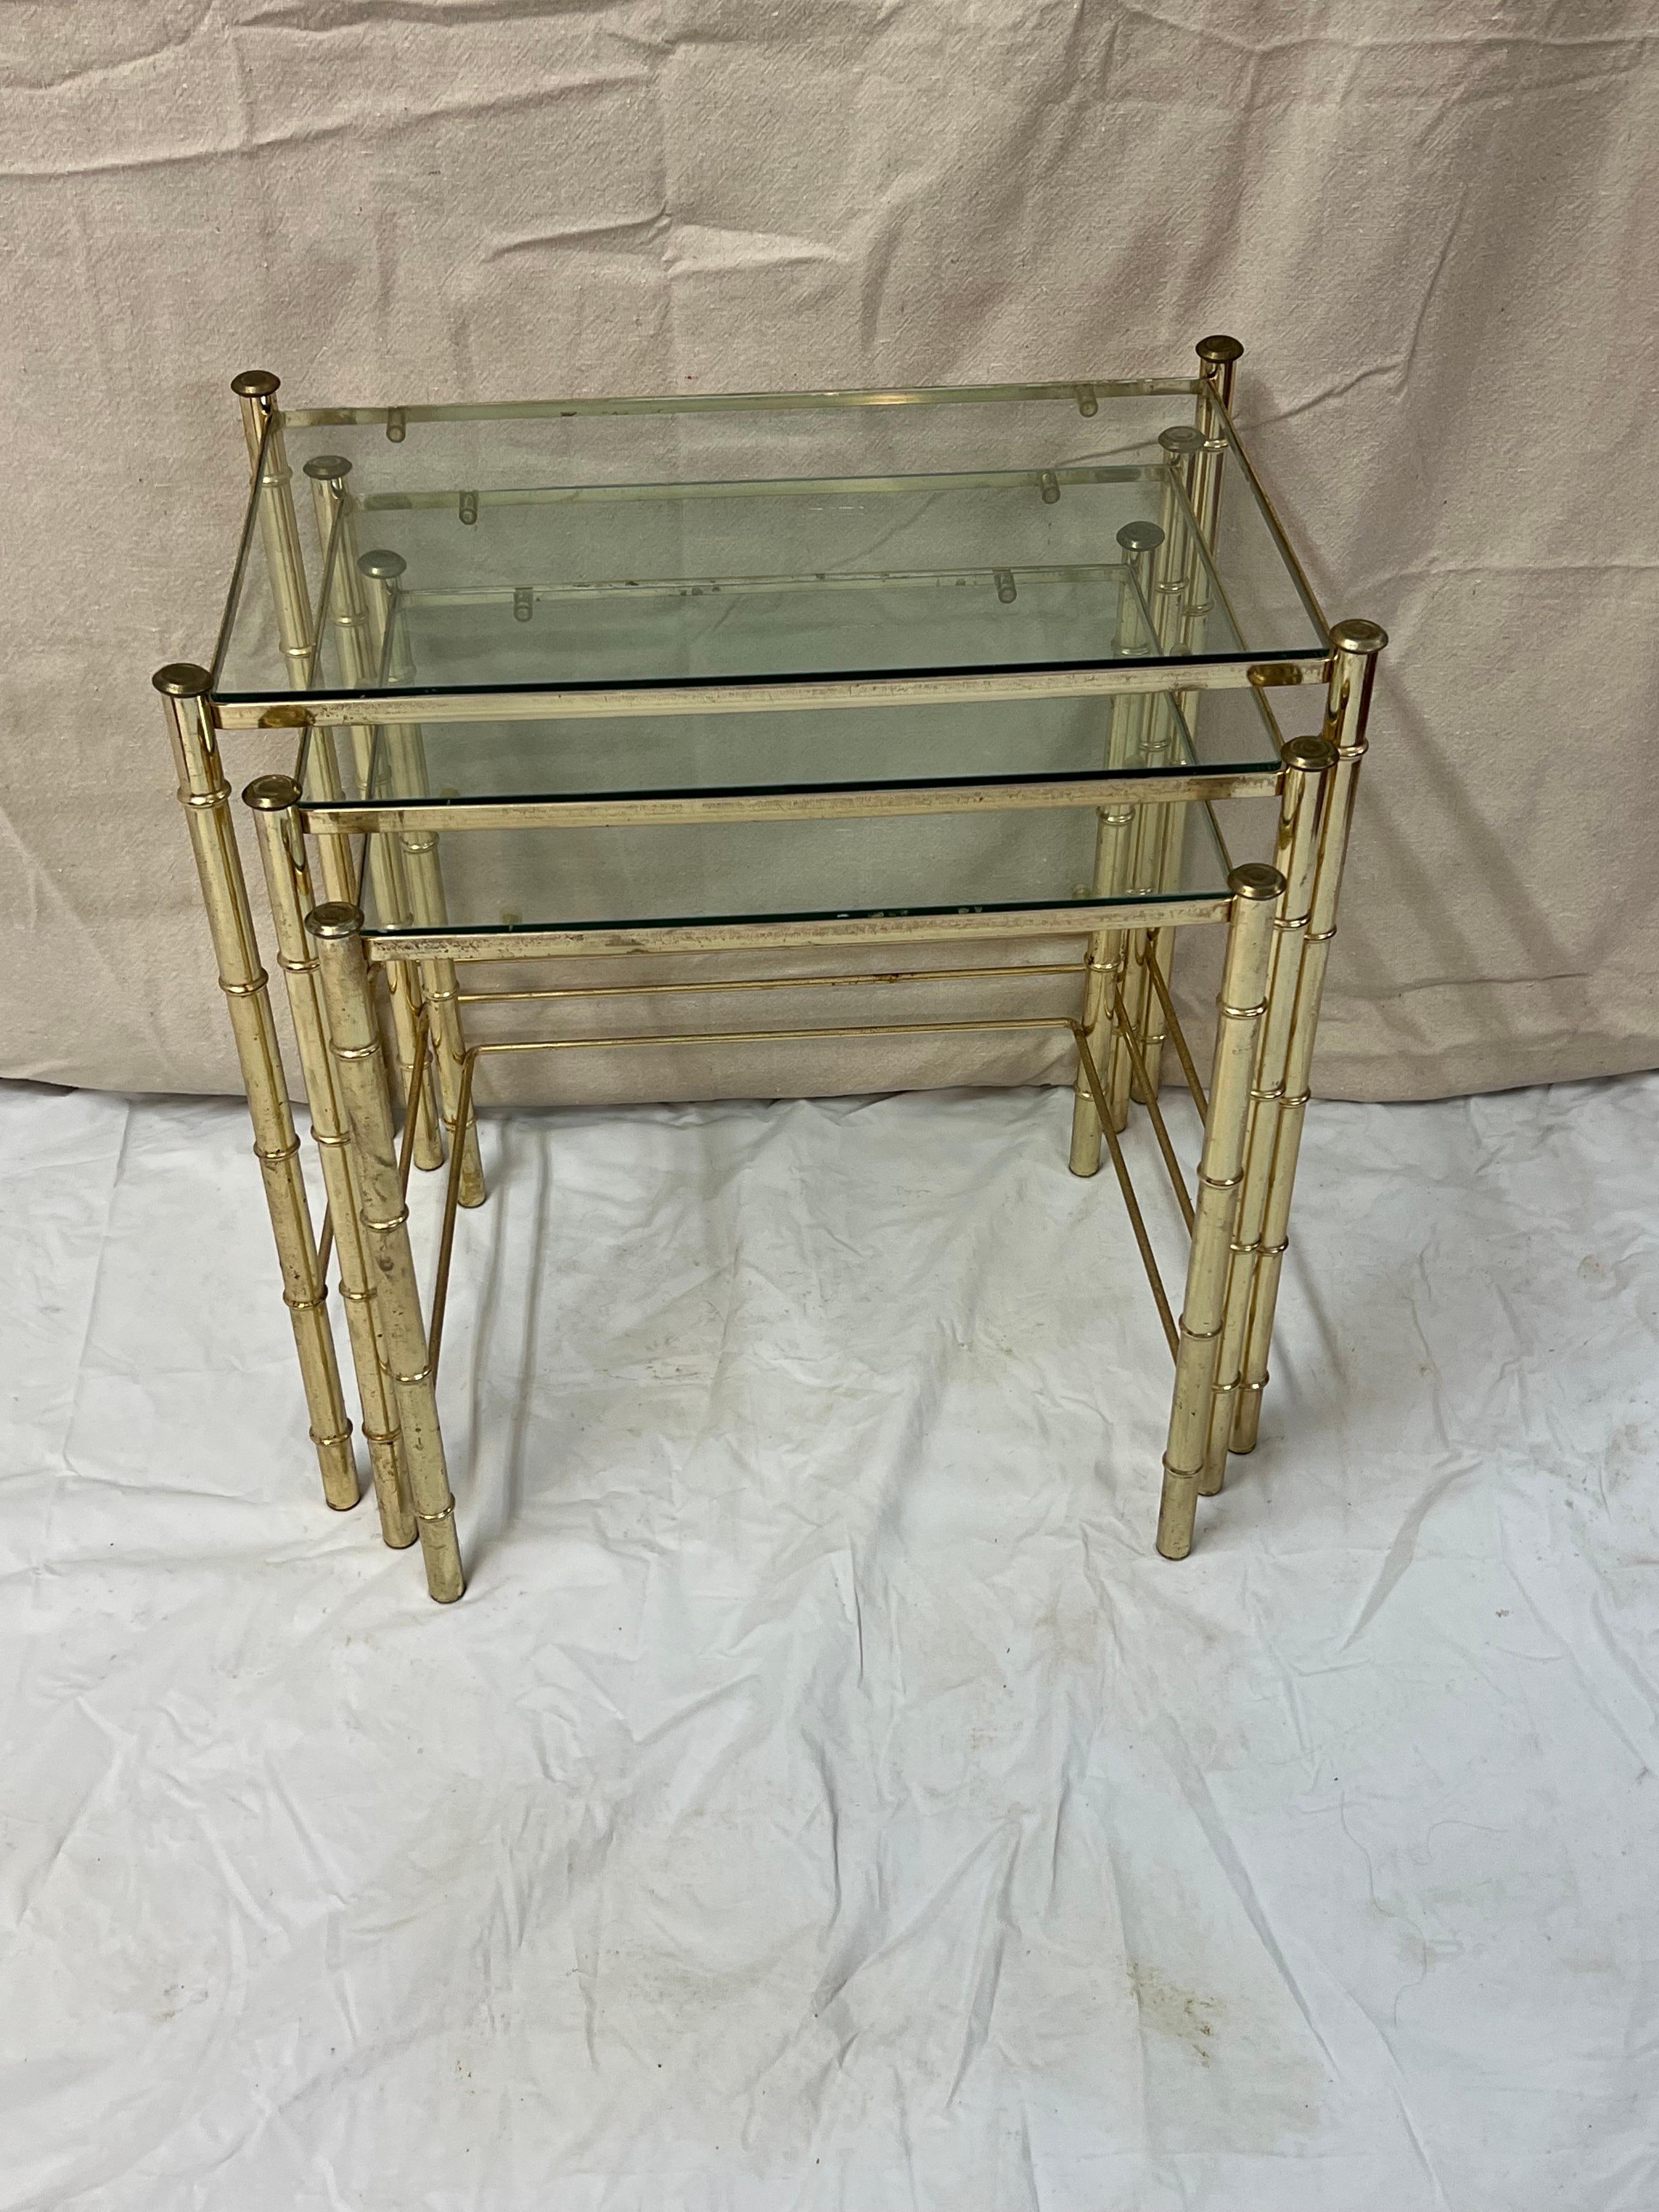 seagrass nesting tables